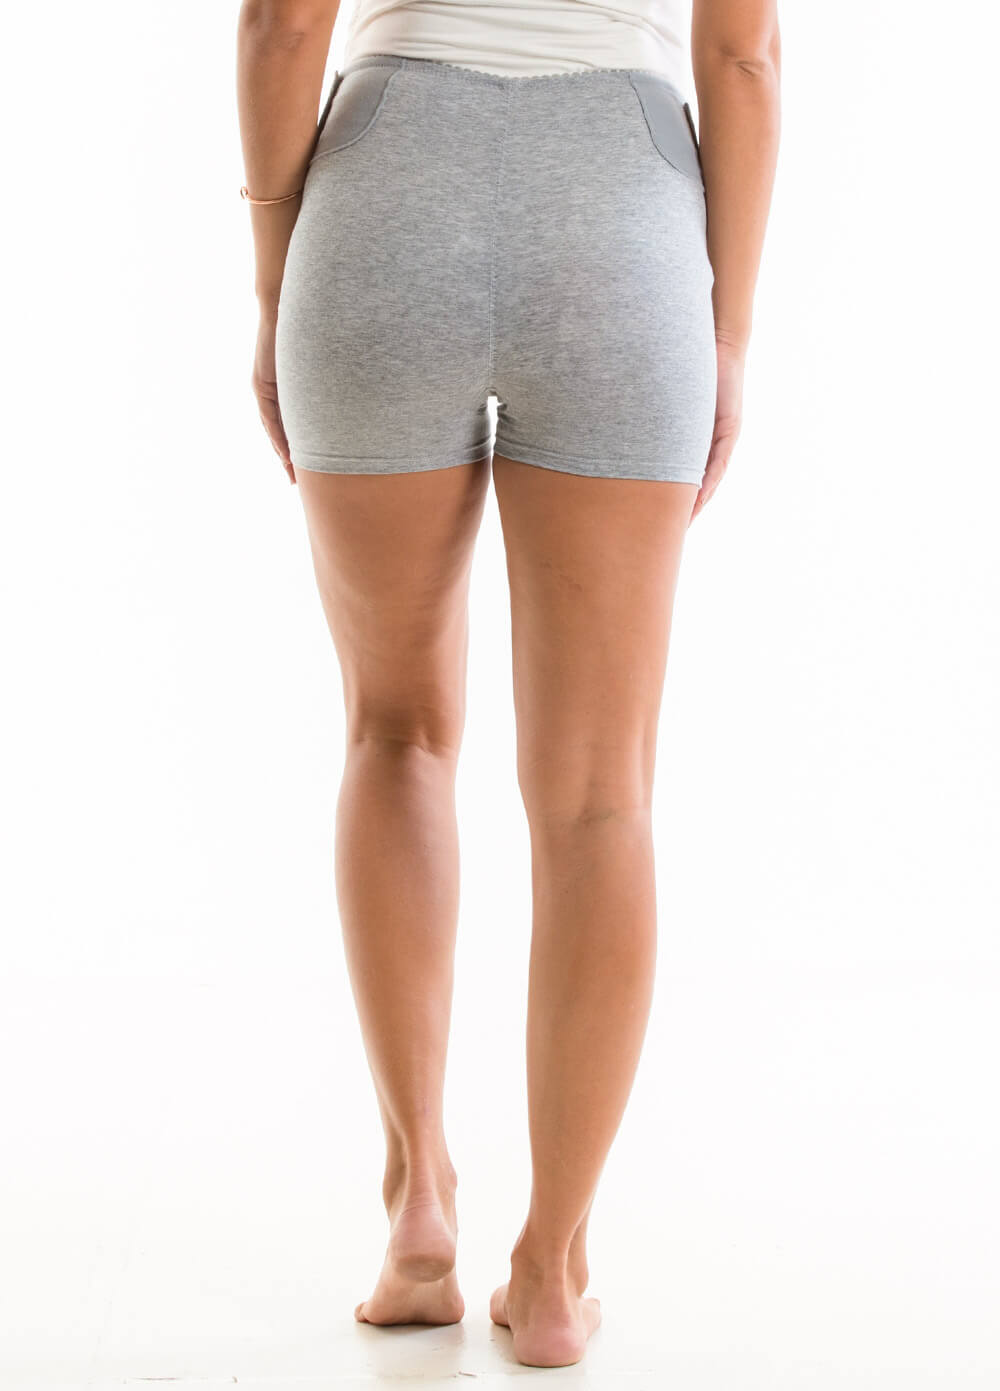 Tiana Adjustable Pregnancy Support Shorts in Grey by Queen Bee